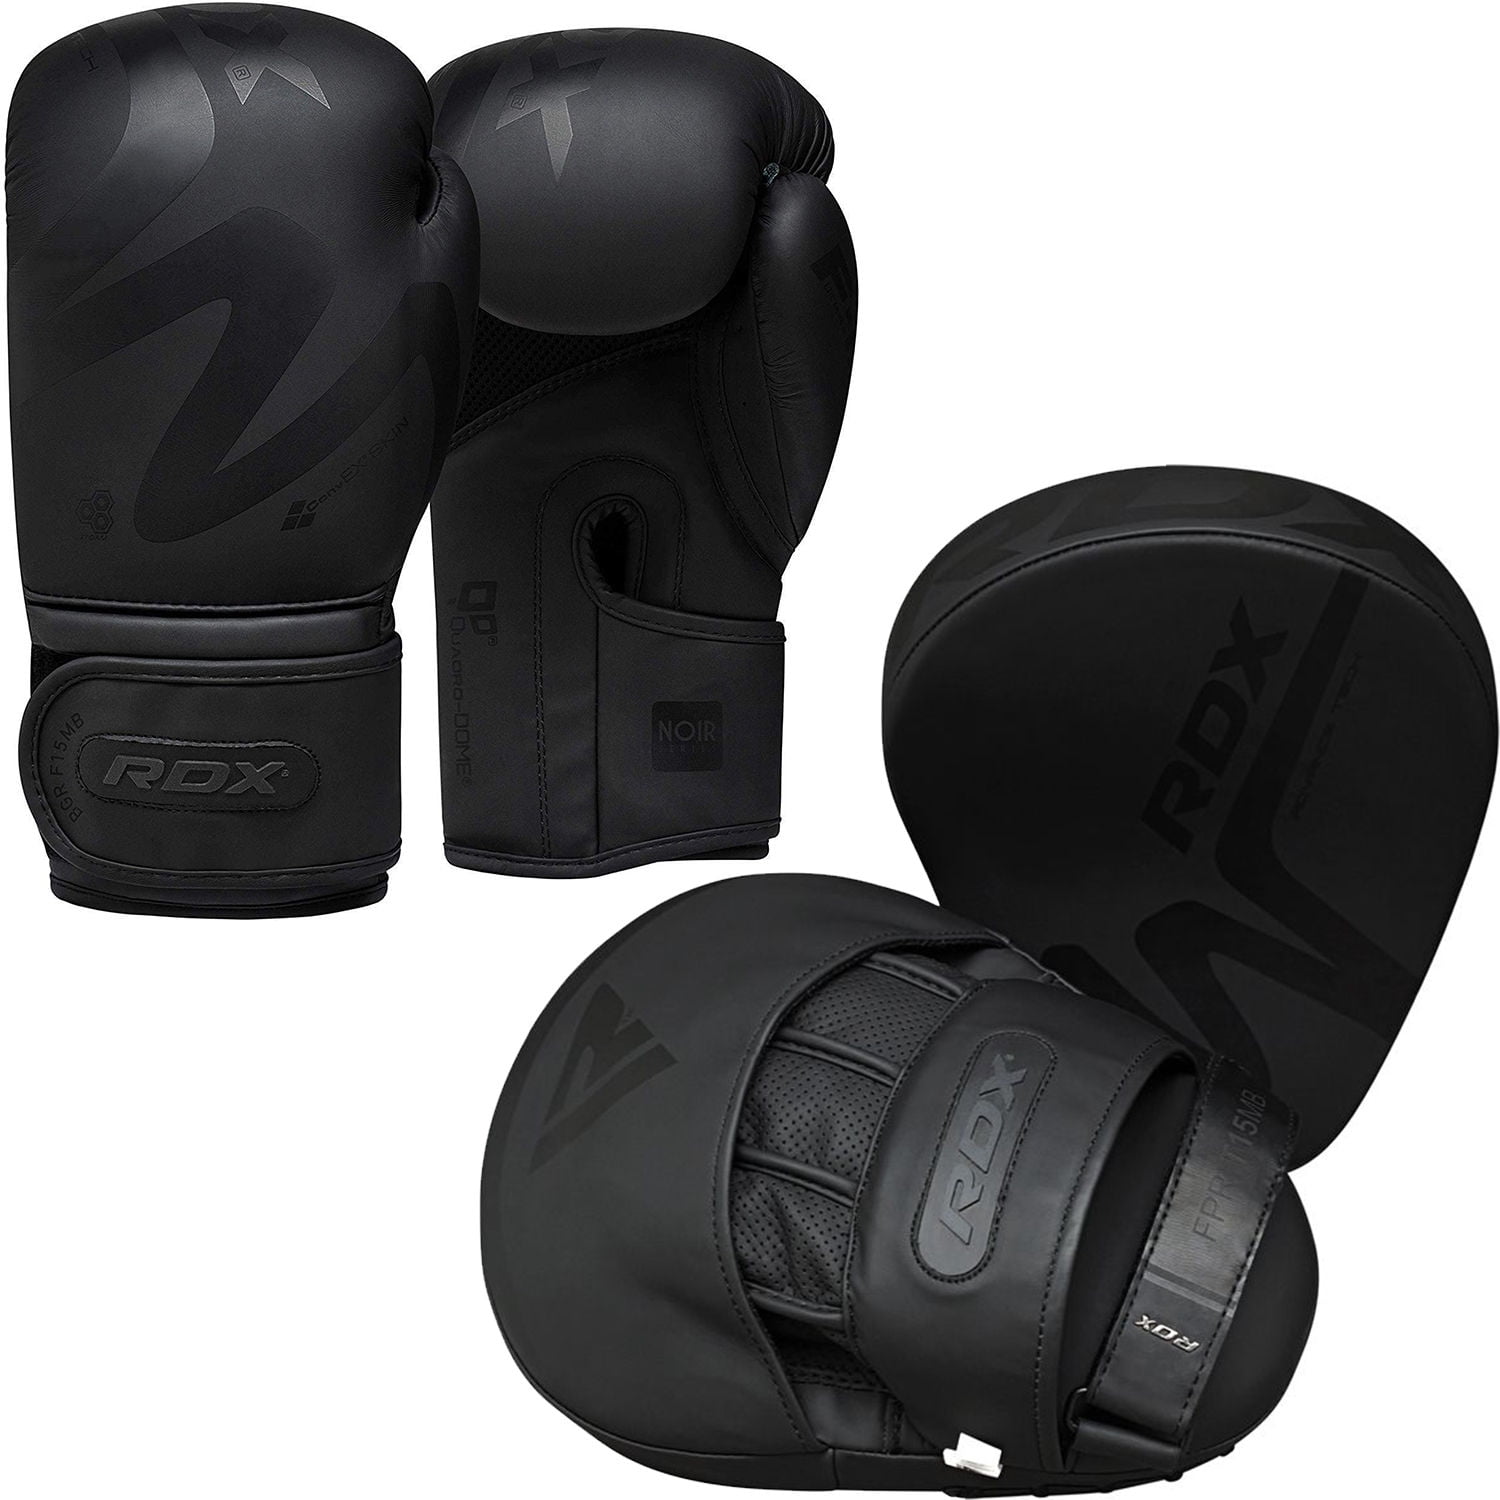 RDX Leather Boxing Gloves MMA Training Fight Sparring Punching kickboxing F15MB 